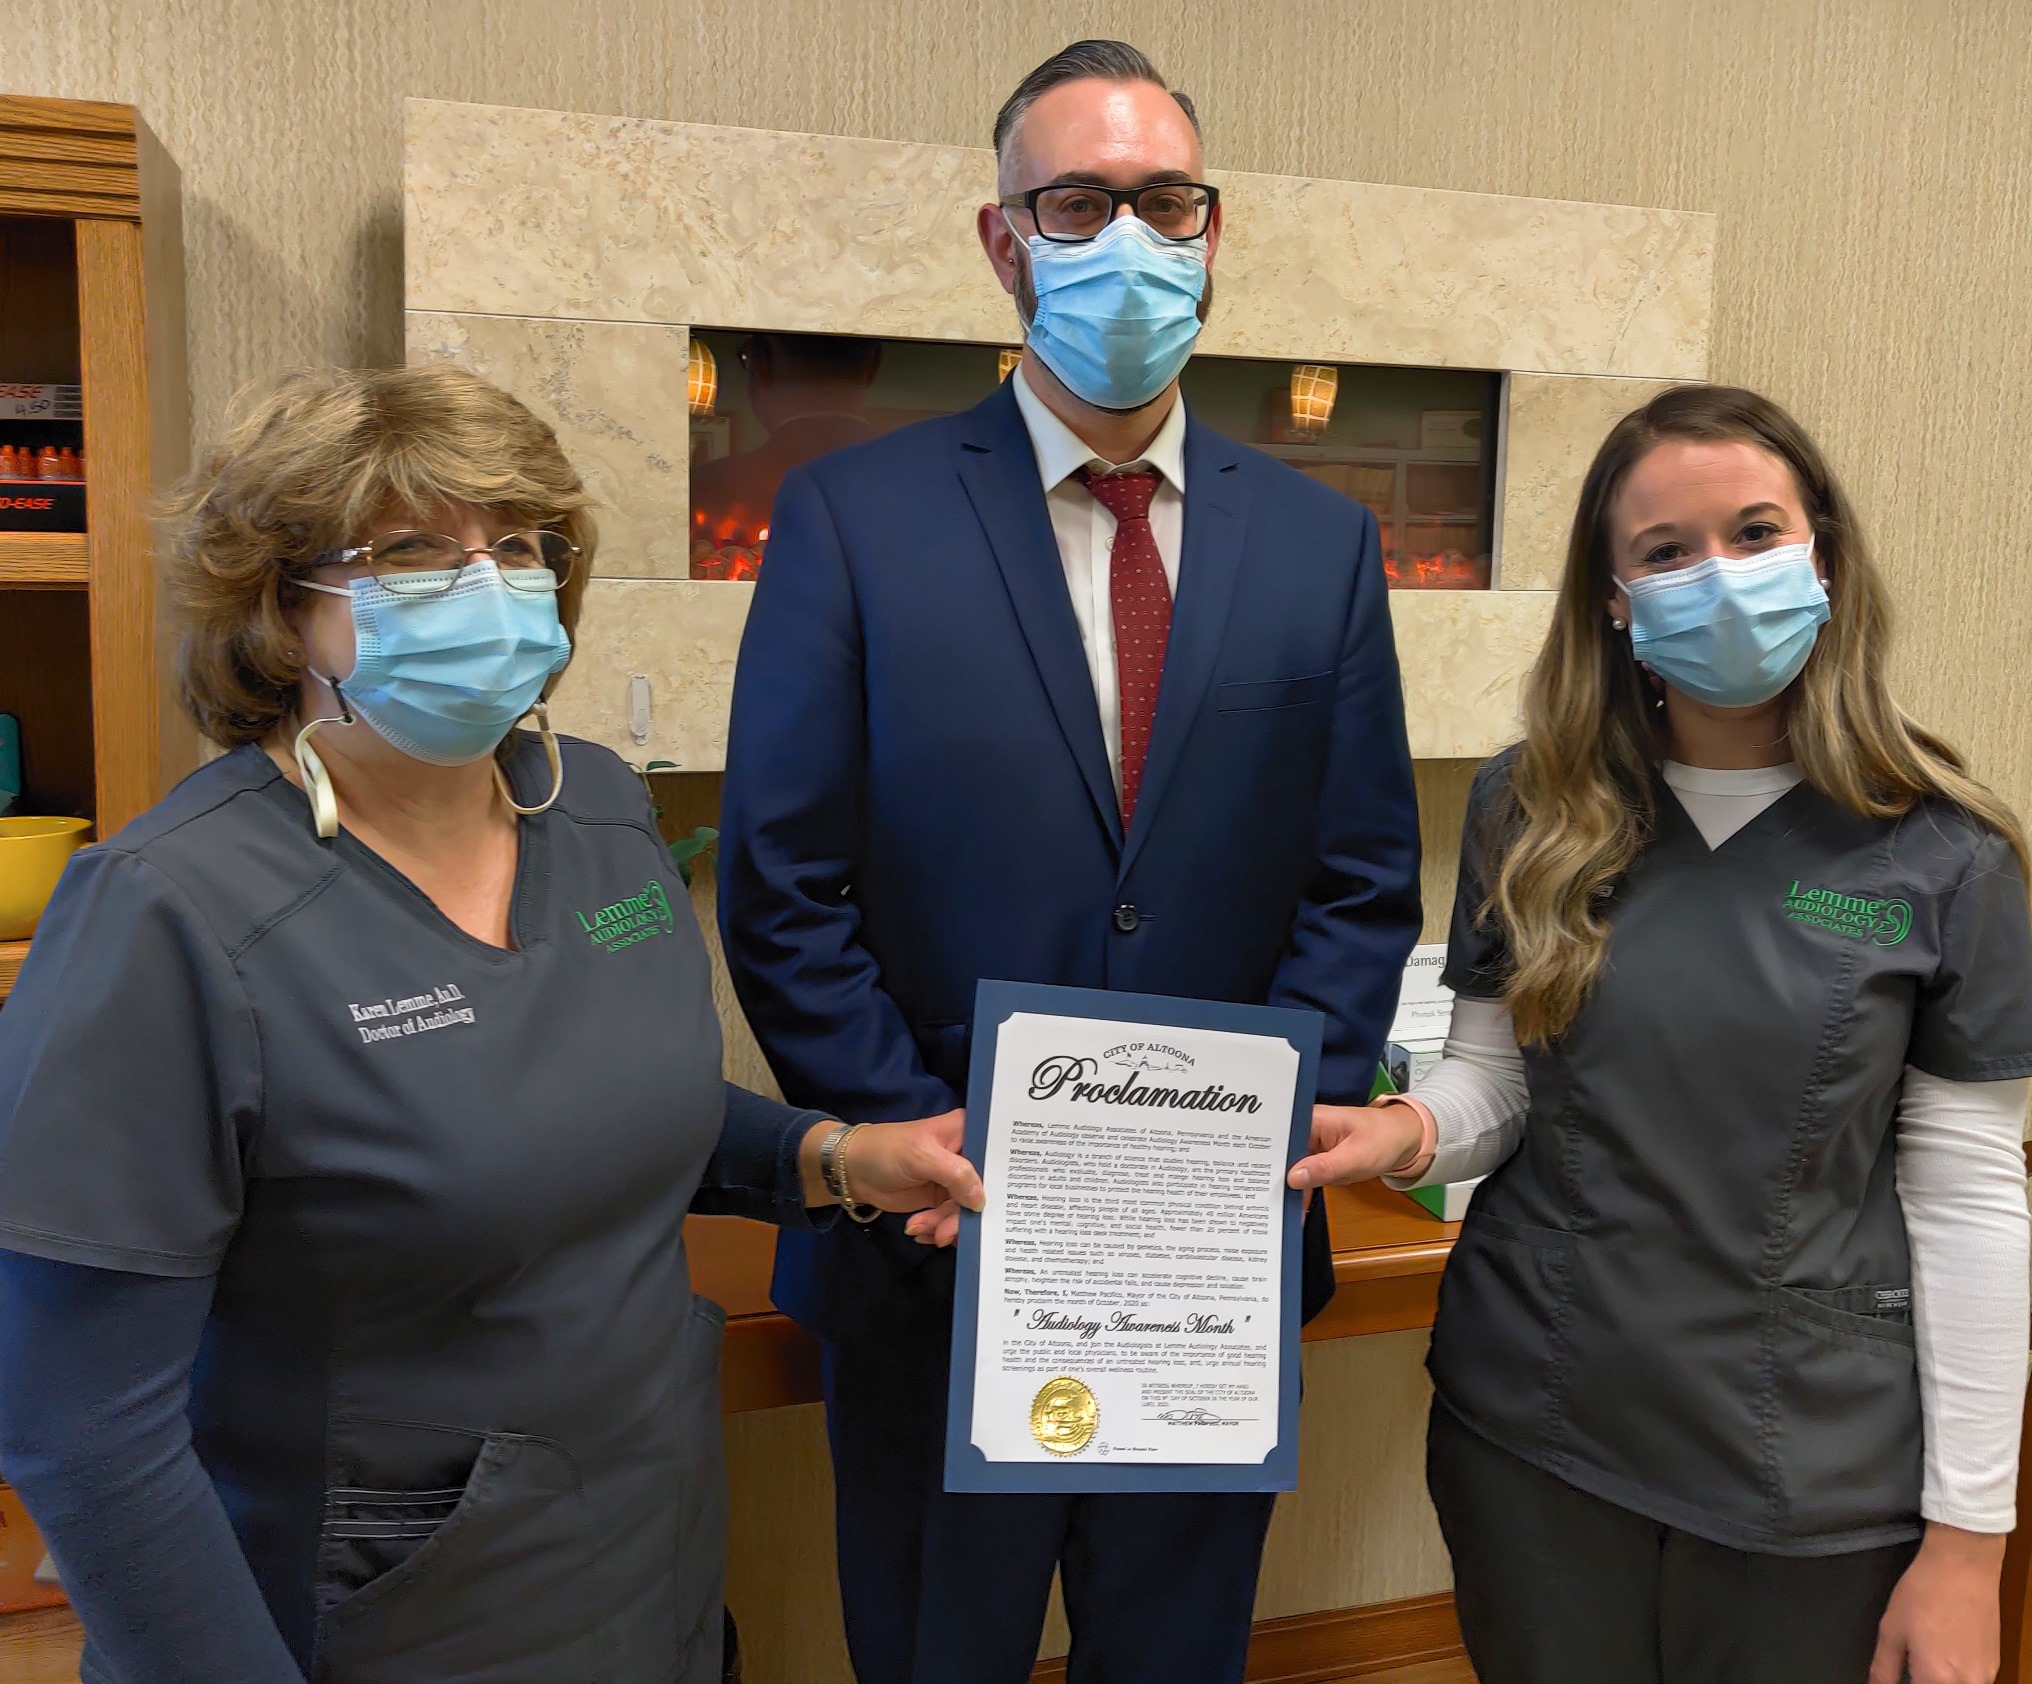 Mayor Matt Pacifico presents proclamation making October Audiology Awareness Month